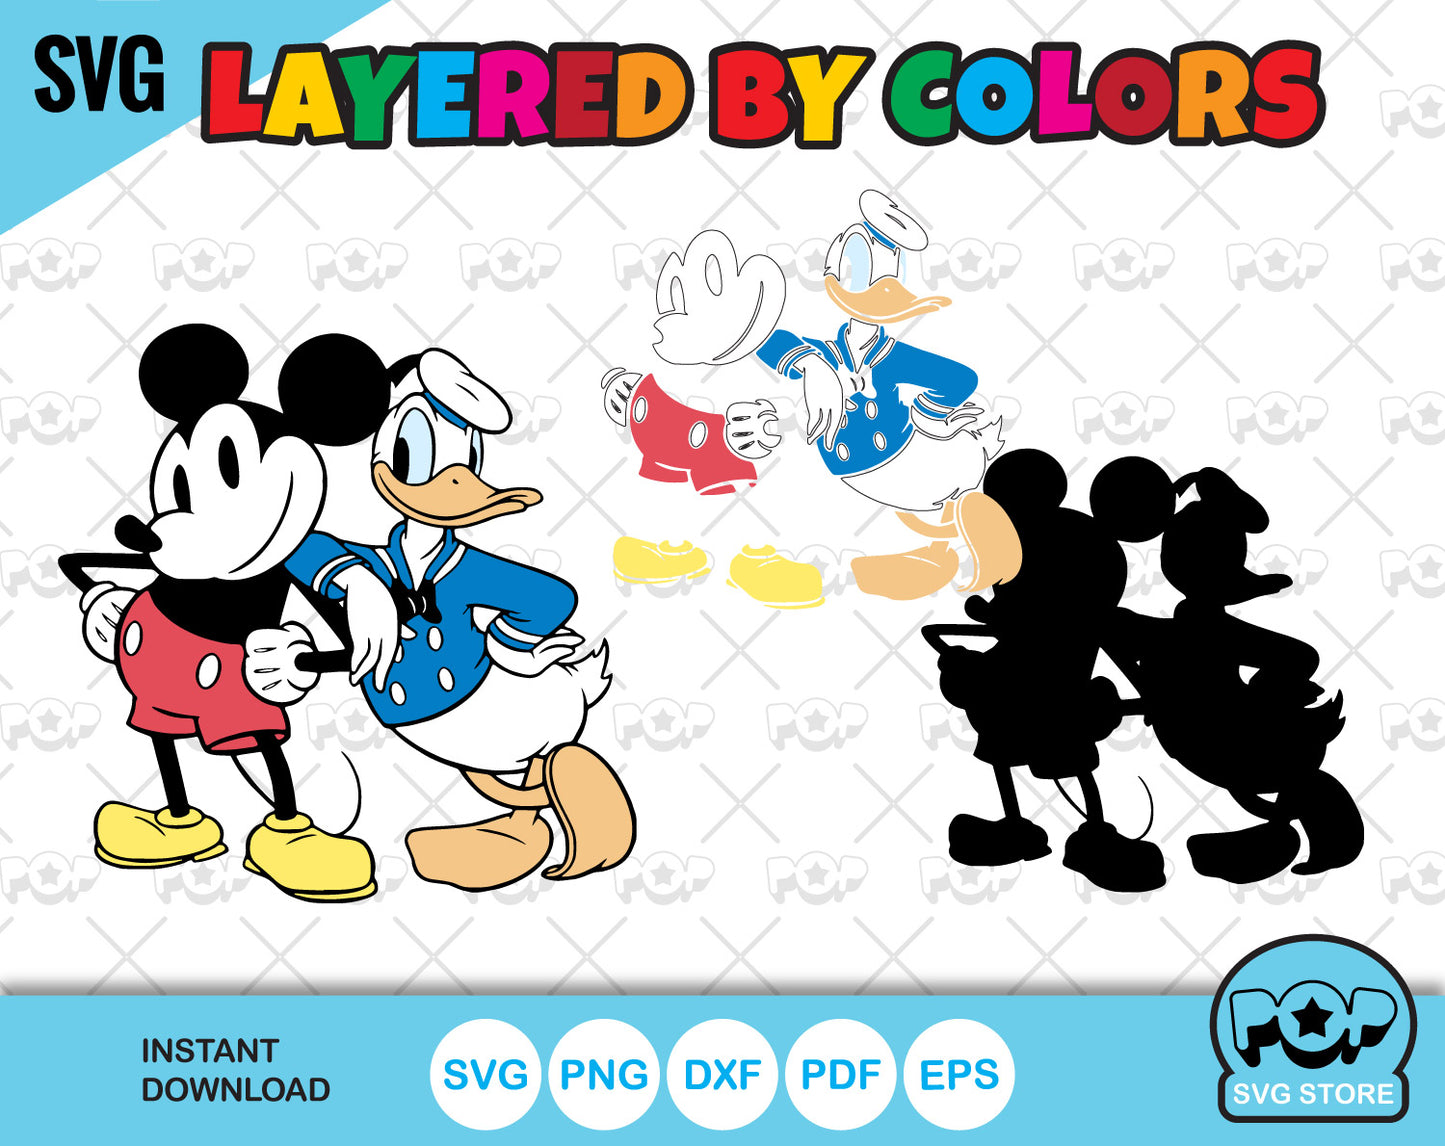 Classic Mickey and Friends 100 cliparts bundle, svg cut files for Cricut / Silhouette, Mickey & friends png, dxf